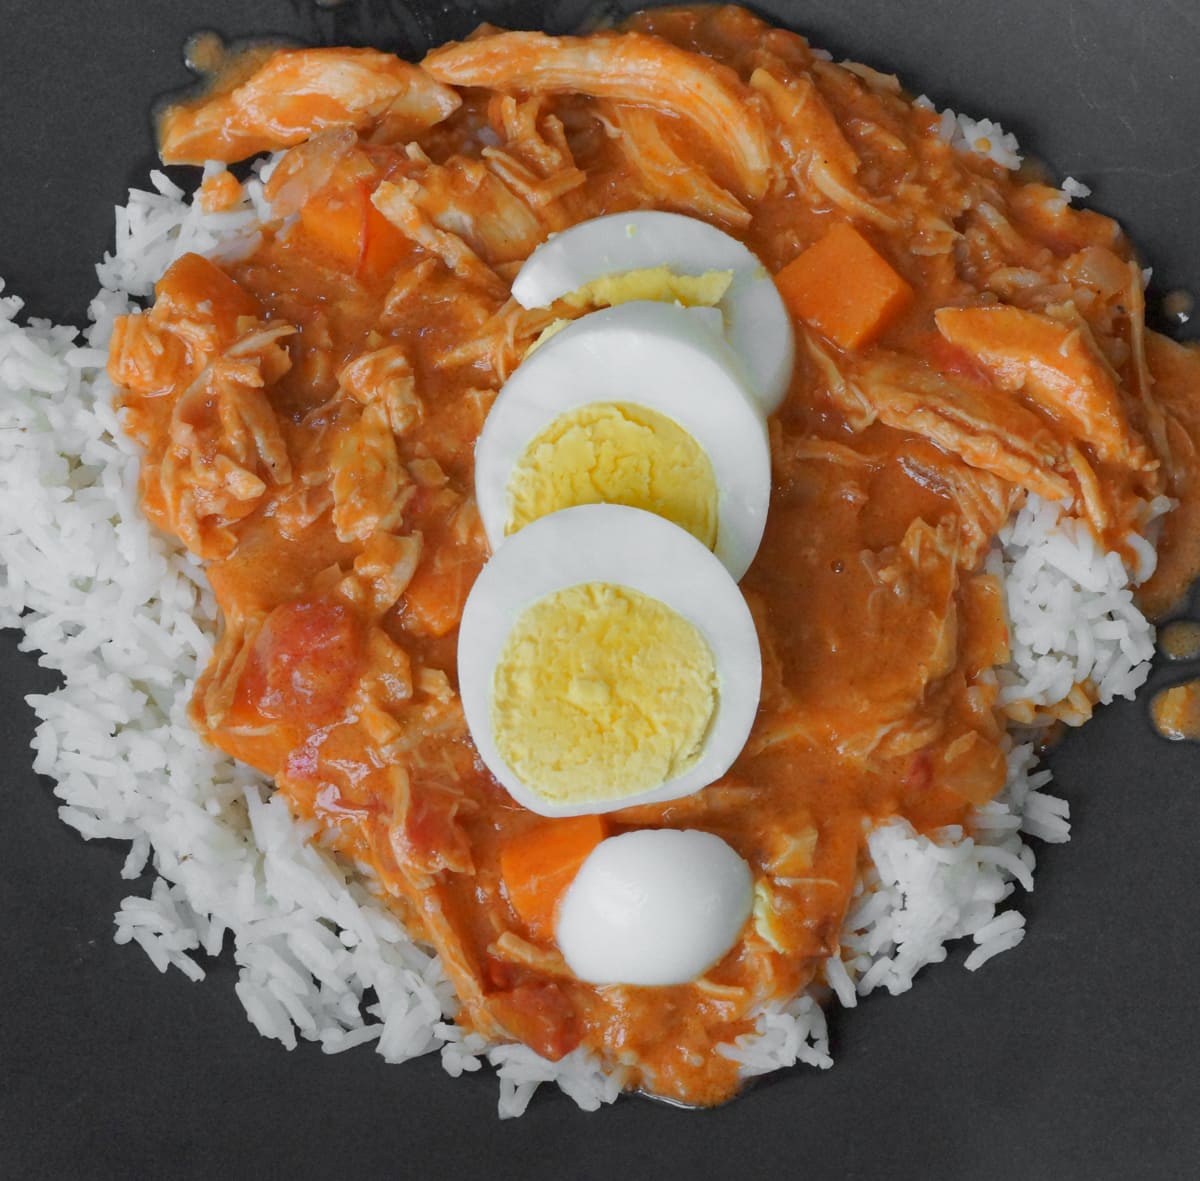 Groundnut stew served with rice and topped with slices of hardboiled egg.